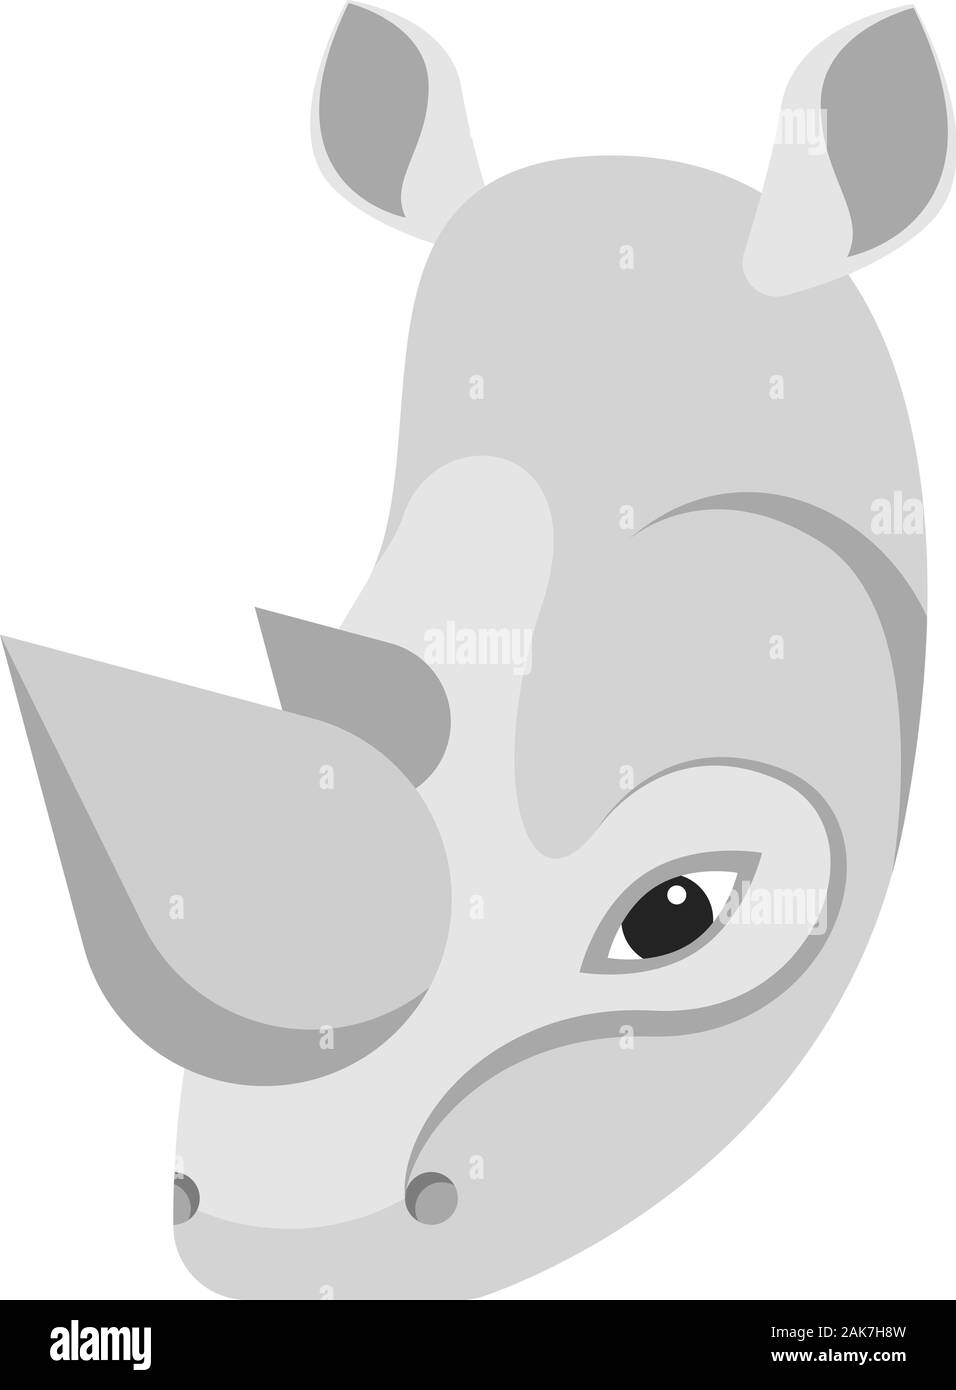 Rhinoceros portrait made in unique simple cartoon style. Head of rhino. Isolated icon for your design. Vector illustration Stock Vector